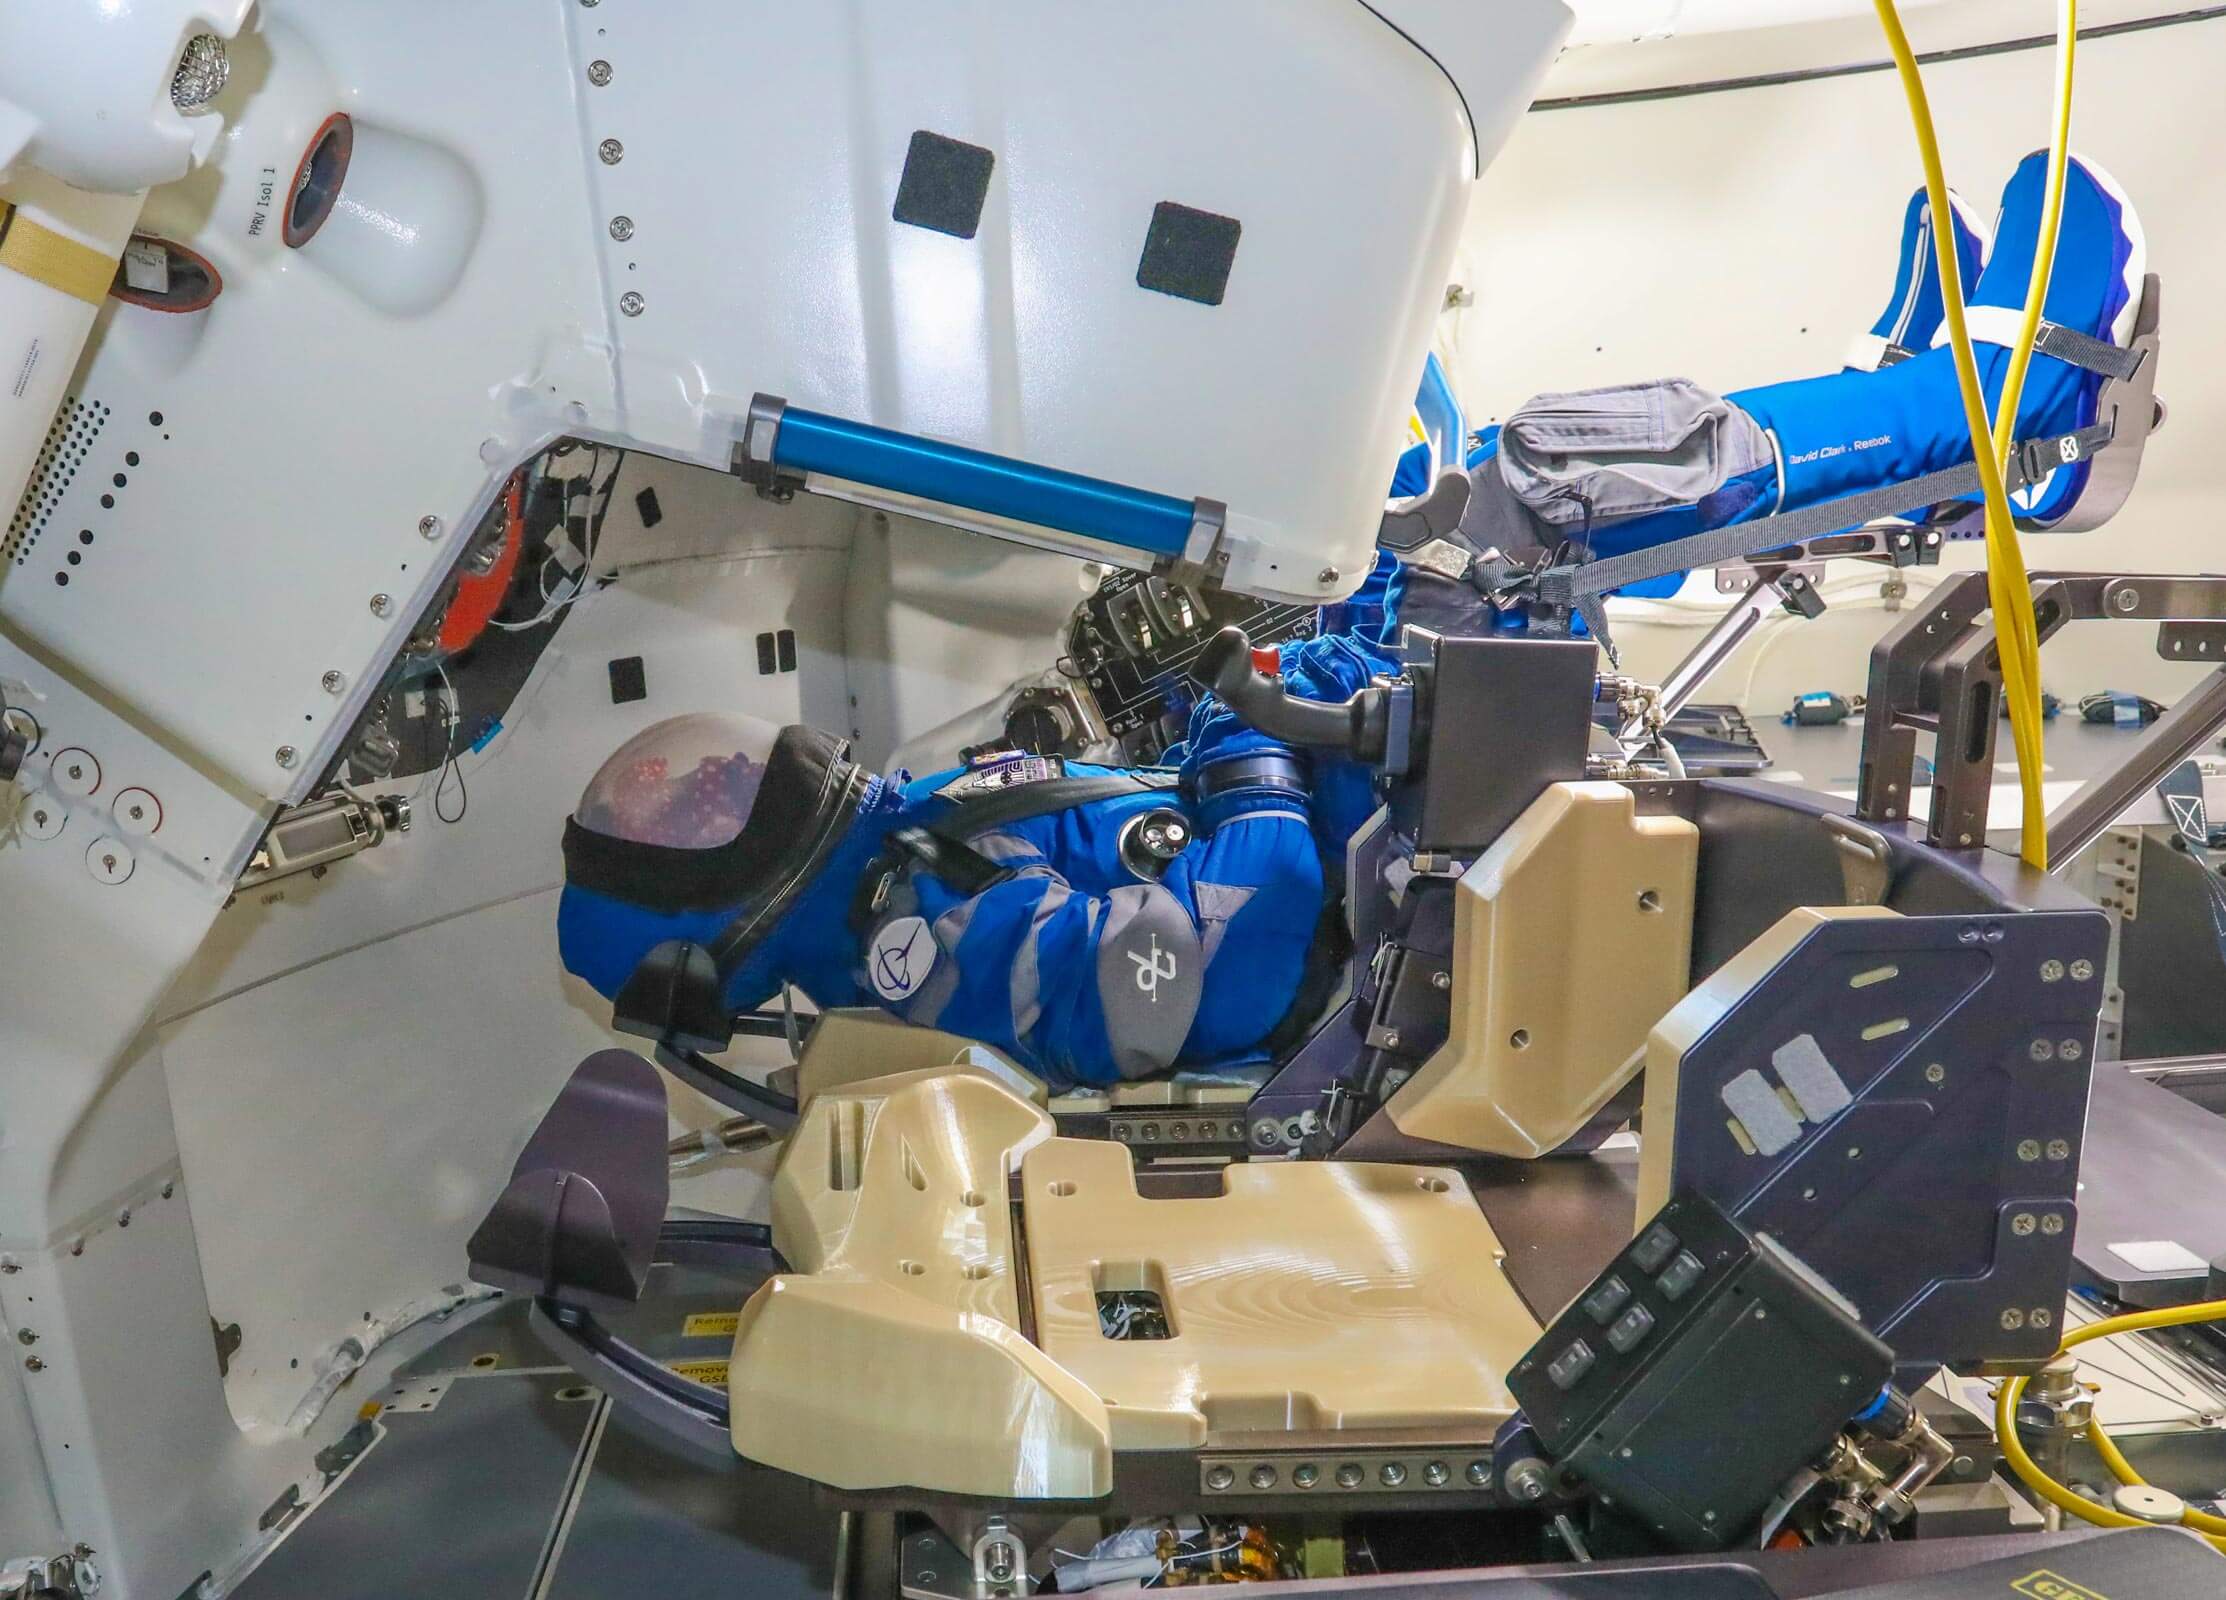 Rosie the Rocketeer, Boeing's anthropometric test device, has taken her place once again in the commander's seat of the company's Starliner spacecraft on its second unmanned flight. The first flight provided hundreds of data on what the astronauts would experience during the flight. On this flight, Rosie will help maintain the spacecraft's center of gravity during launch, docking, disengagement and landing. Credit: Boeing/John Proferes